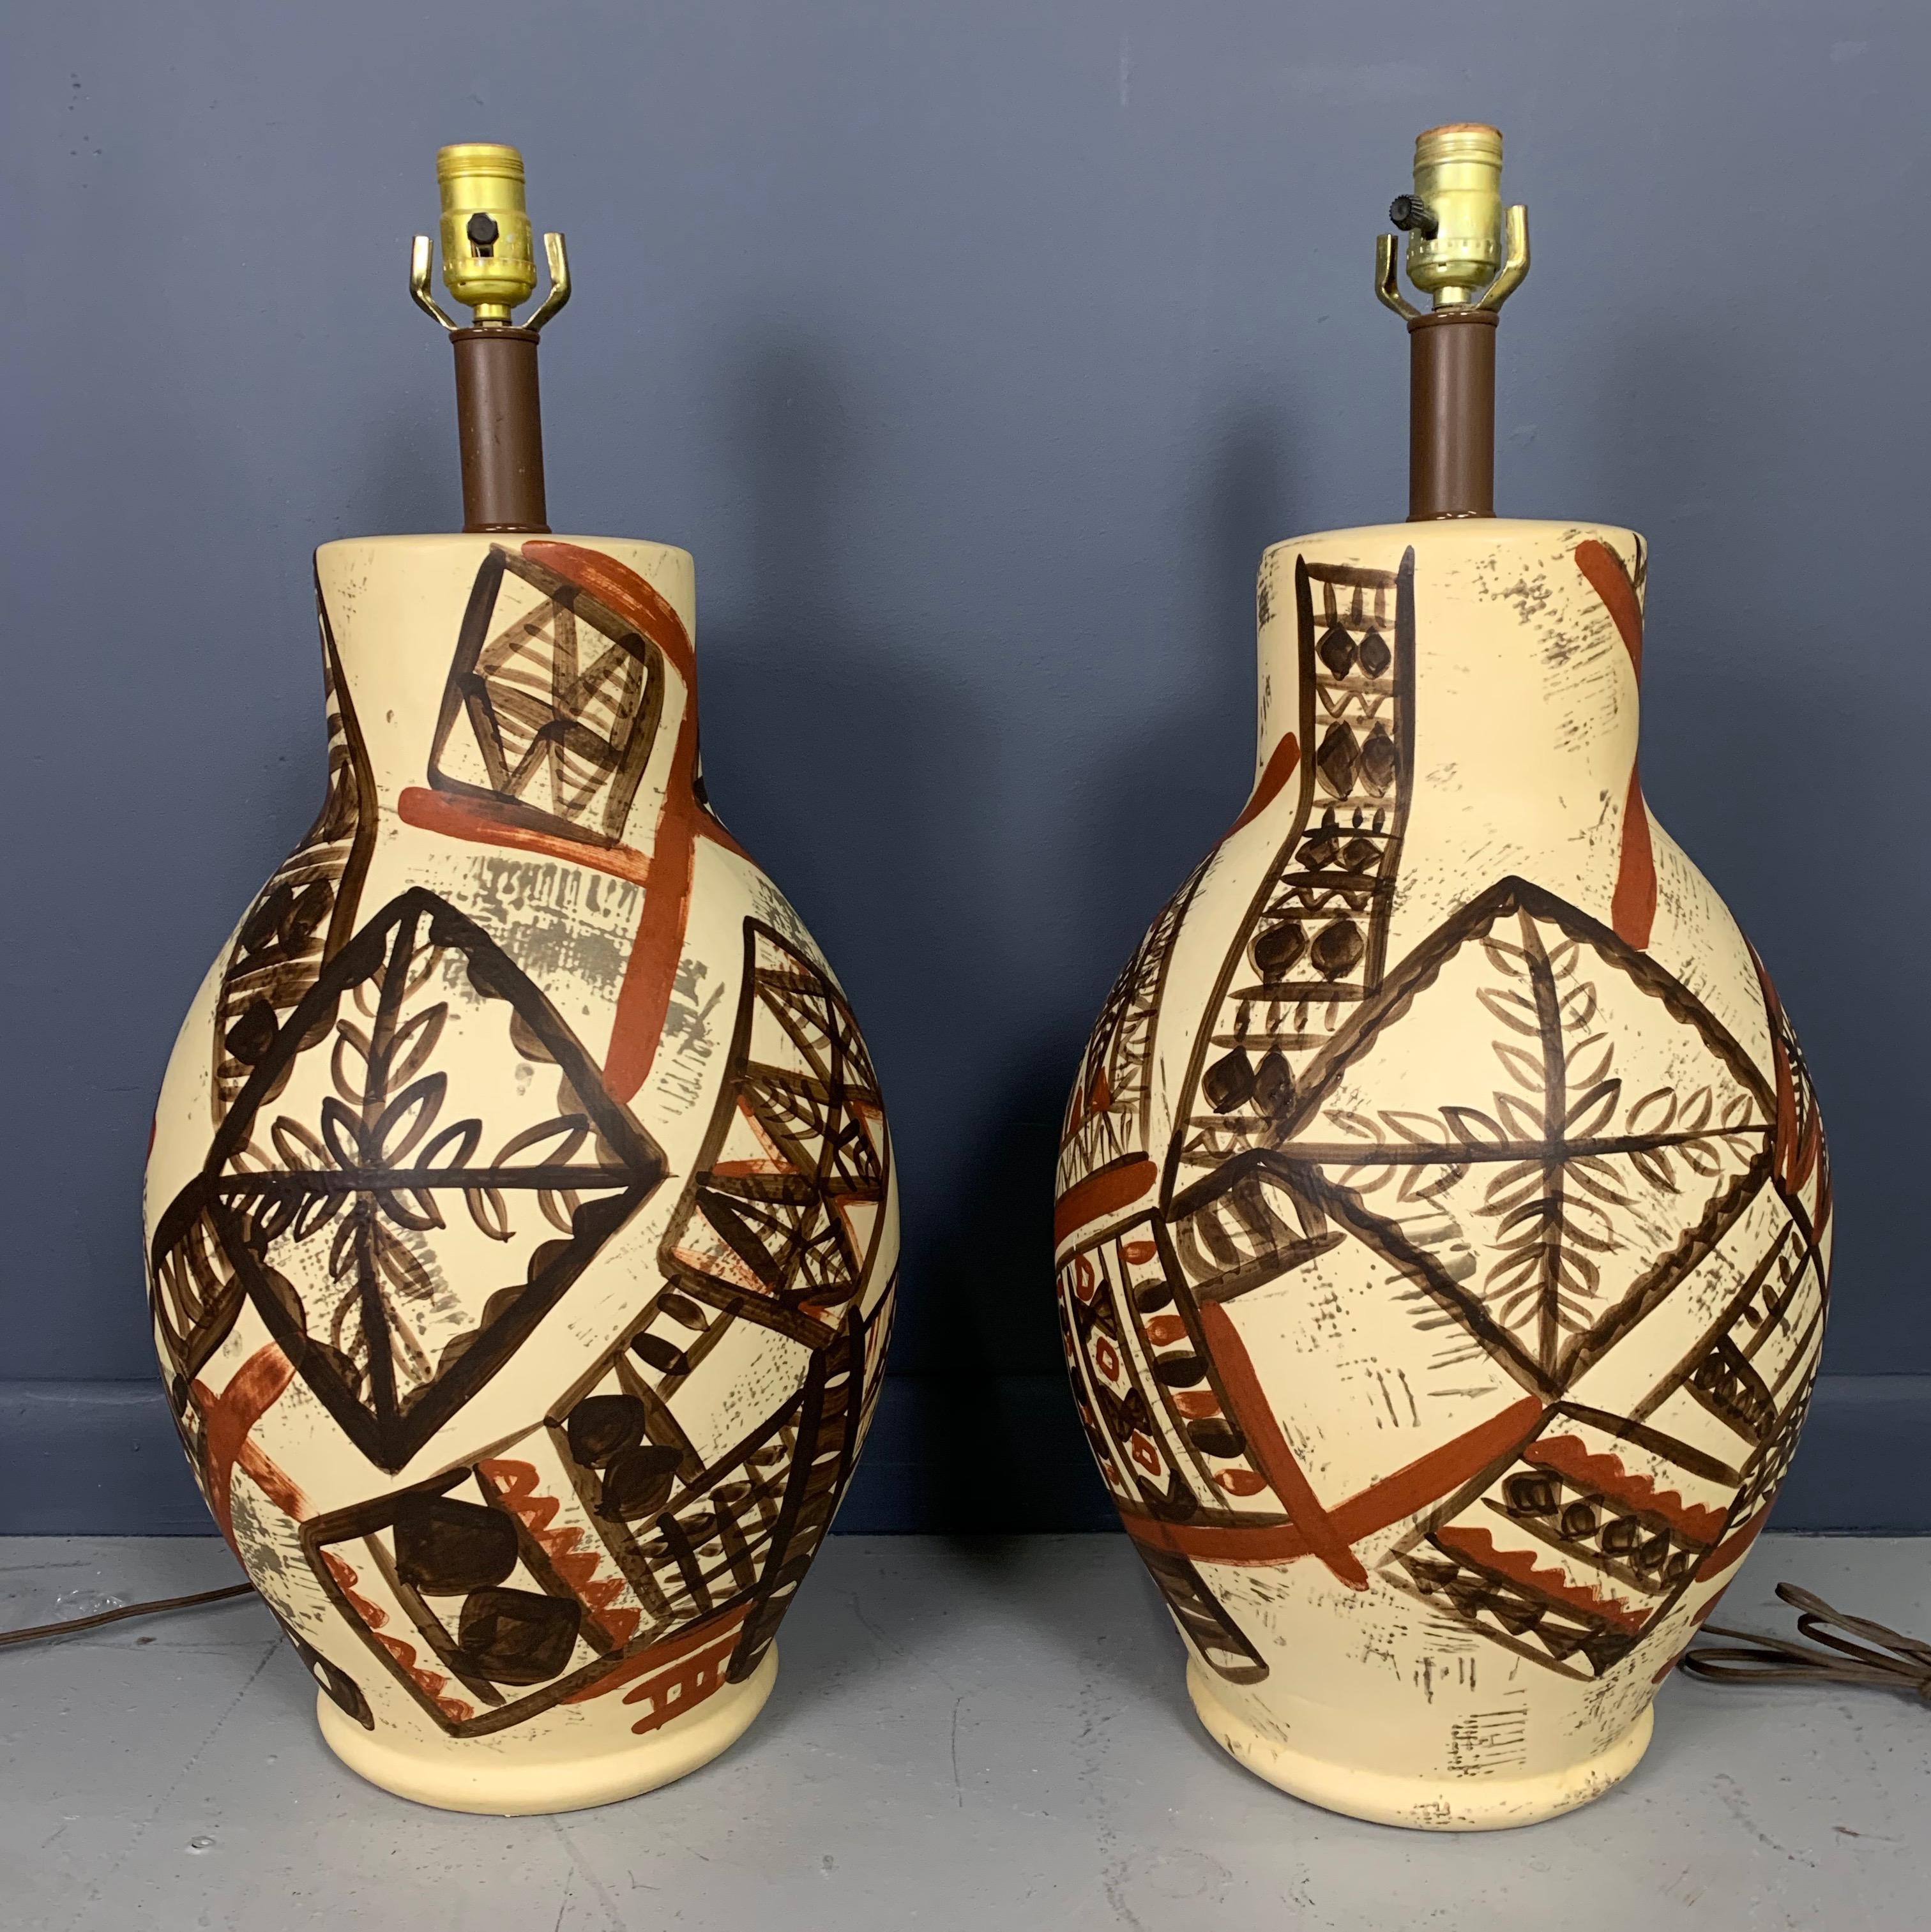 These impressive hand decorated lamps in an abstract design have a midcentury sensibility with a decoration that is reminiscent of Picasso ceramics.

 